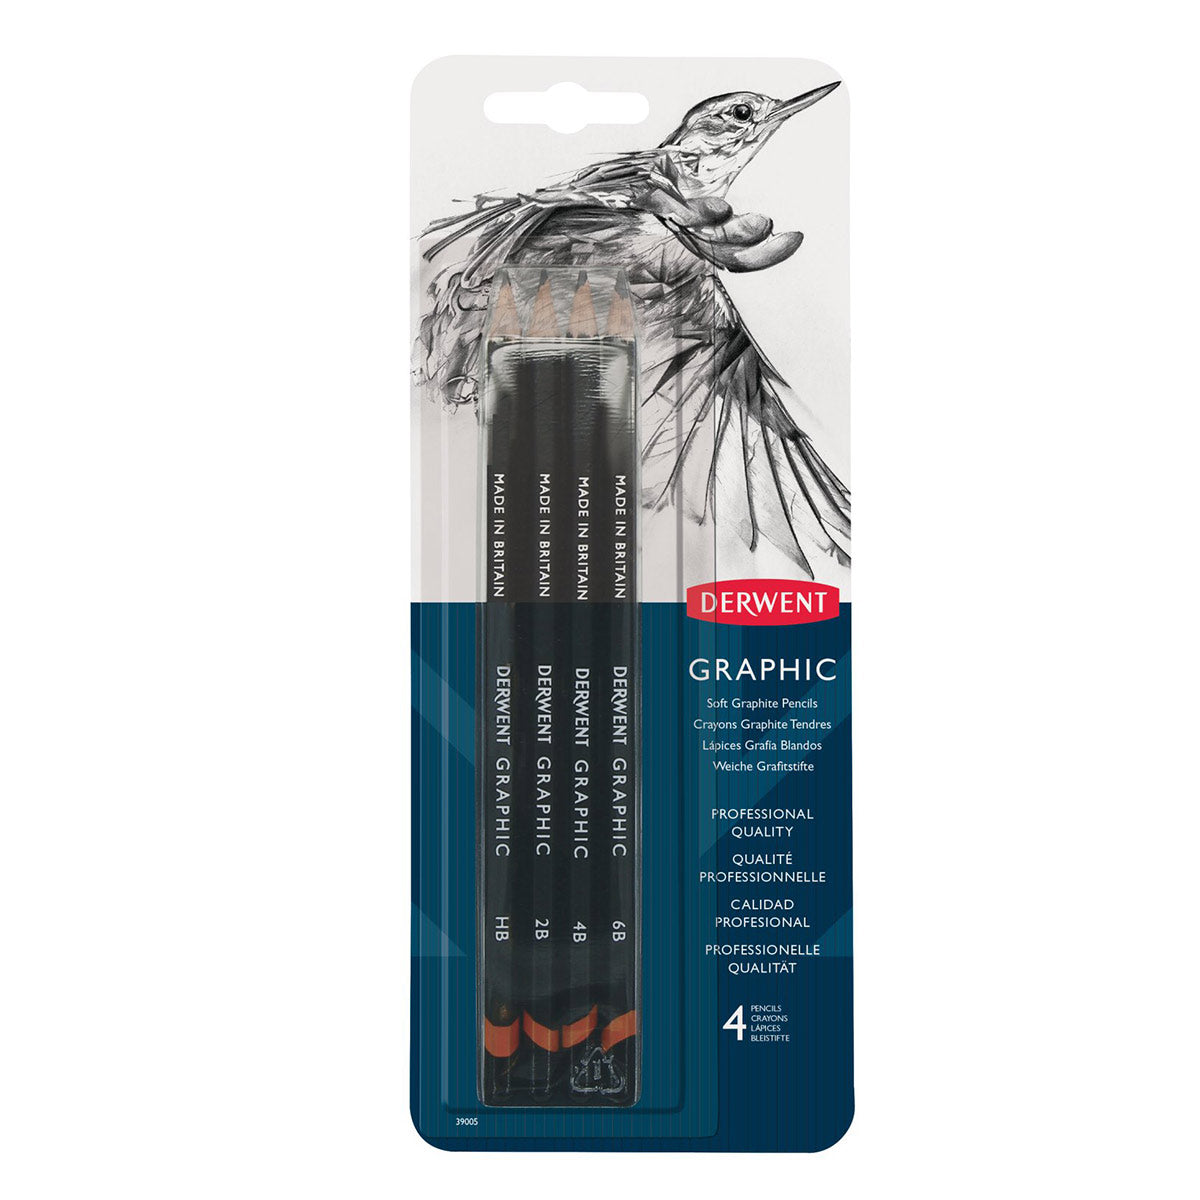 Derwent - Blister 4 Pack - Graphic Pencil Sketching